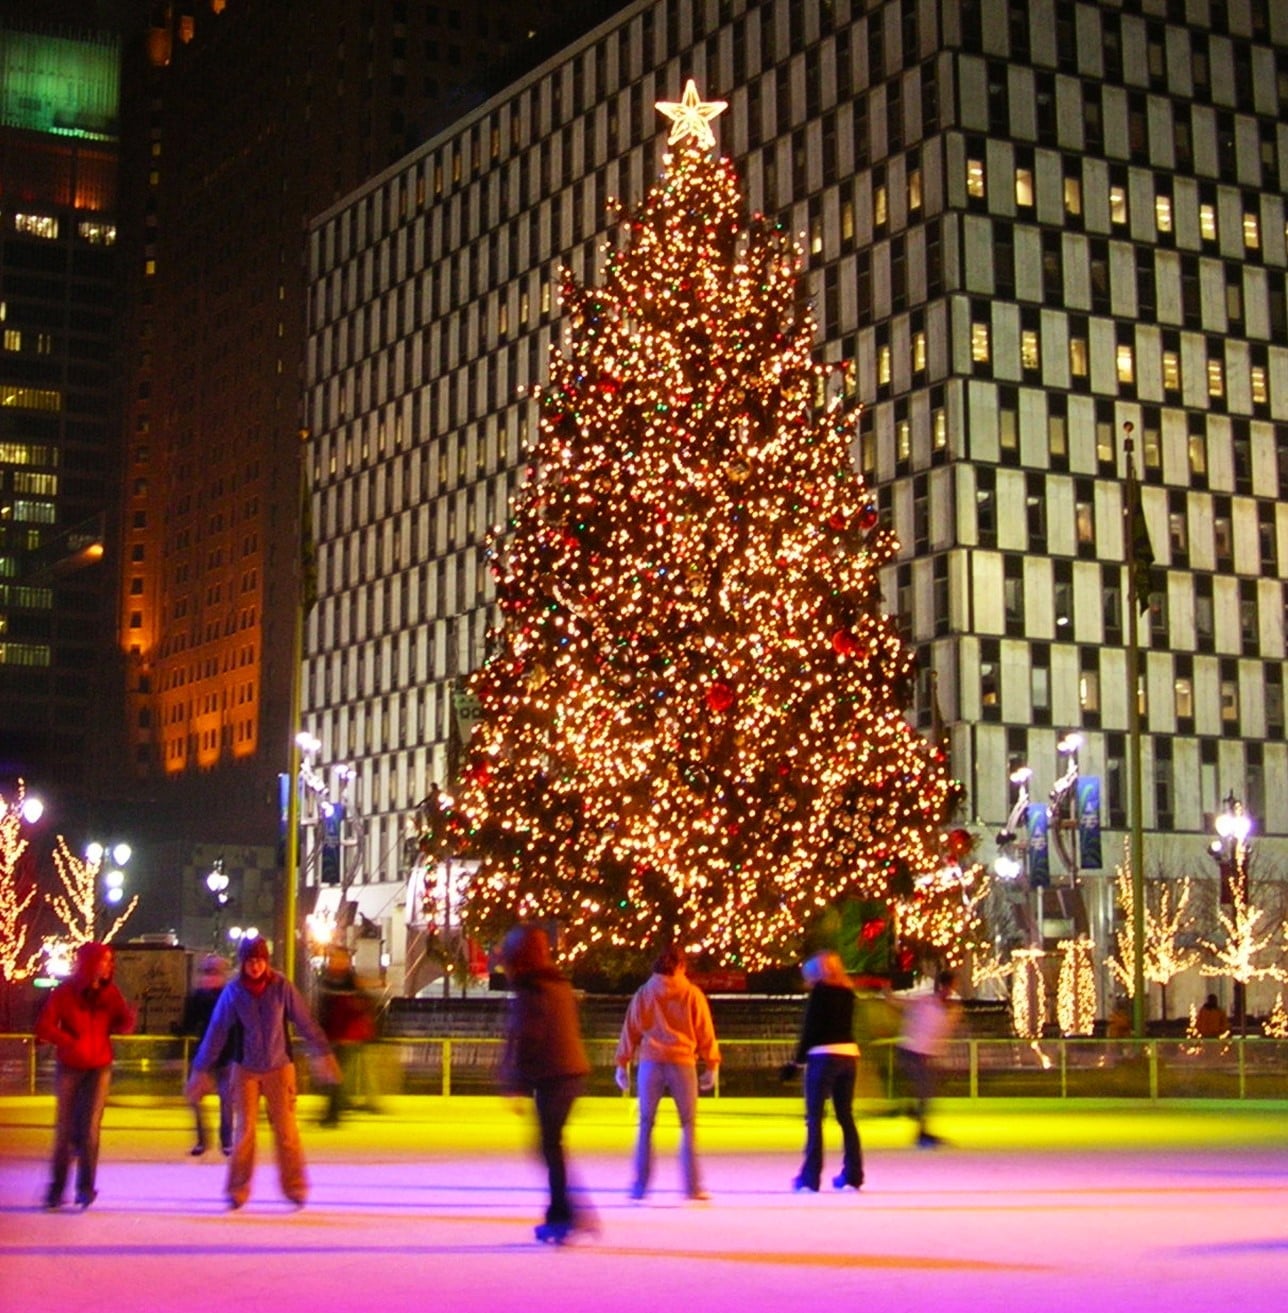 Skaters enjoy the rink at popular Campus Martius Park in Downtown Detroit. The glowing holiday tree is lit up in the background.